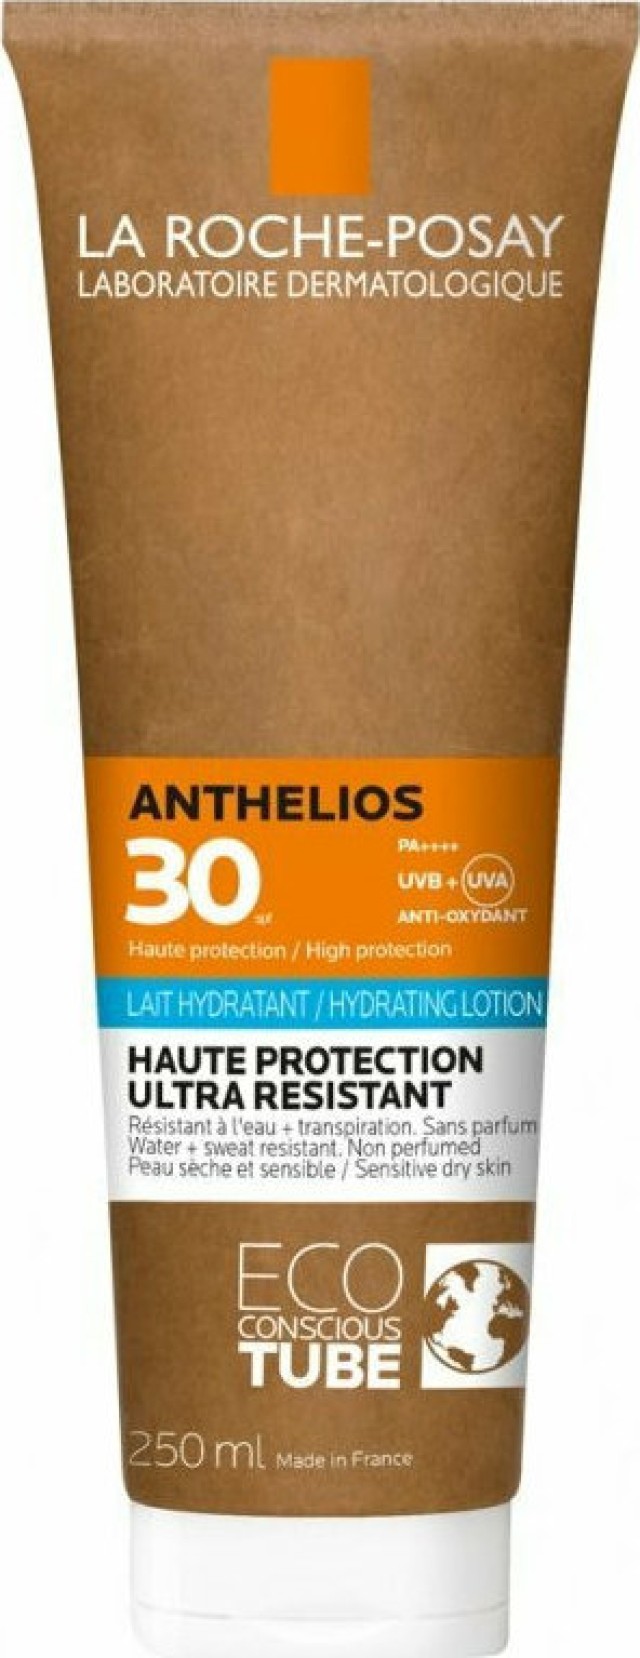 La Roche Posay Anthelios Eco-Conscious Αδιάβροχο Αντηλιακό Σώματος SPF30 250ml